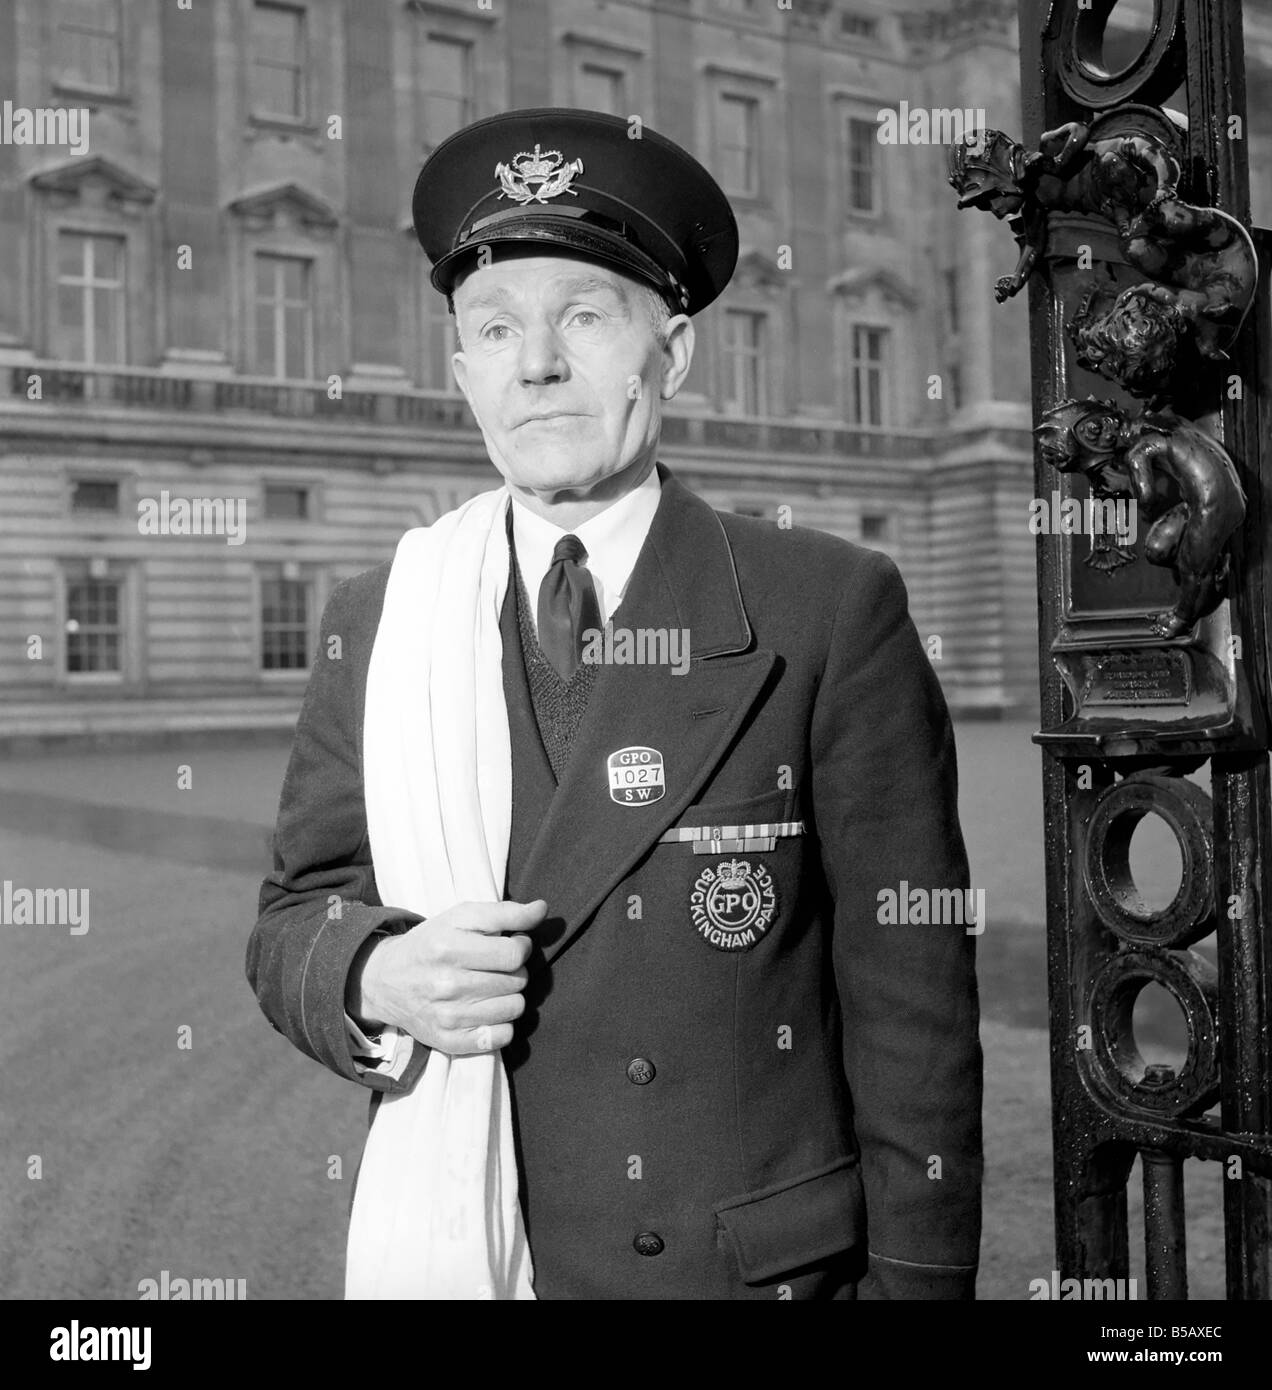 The Royal Postman stands at the gates to Buckingham Palace before ...